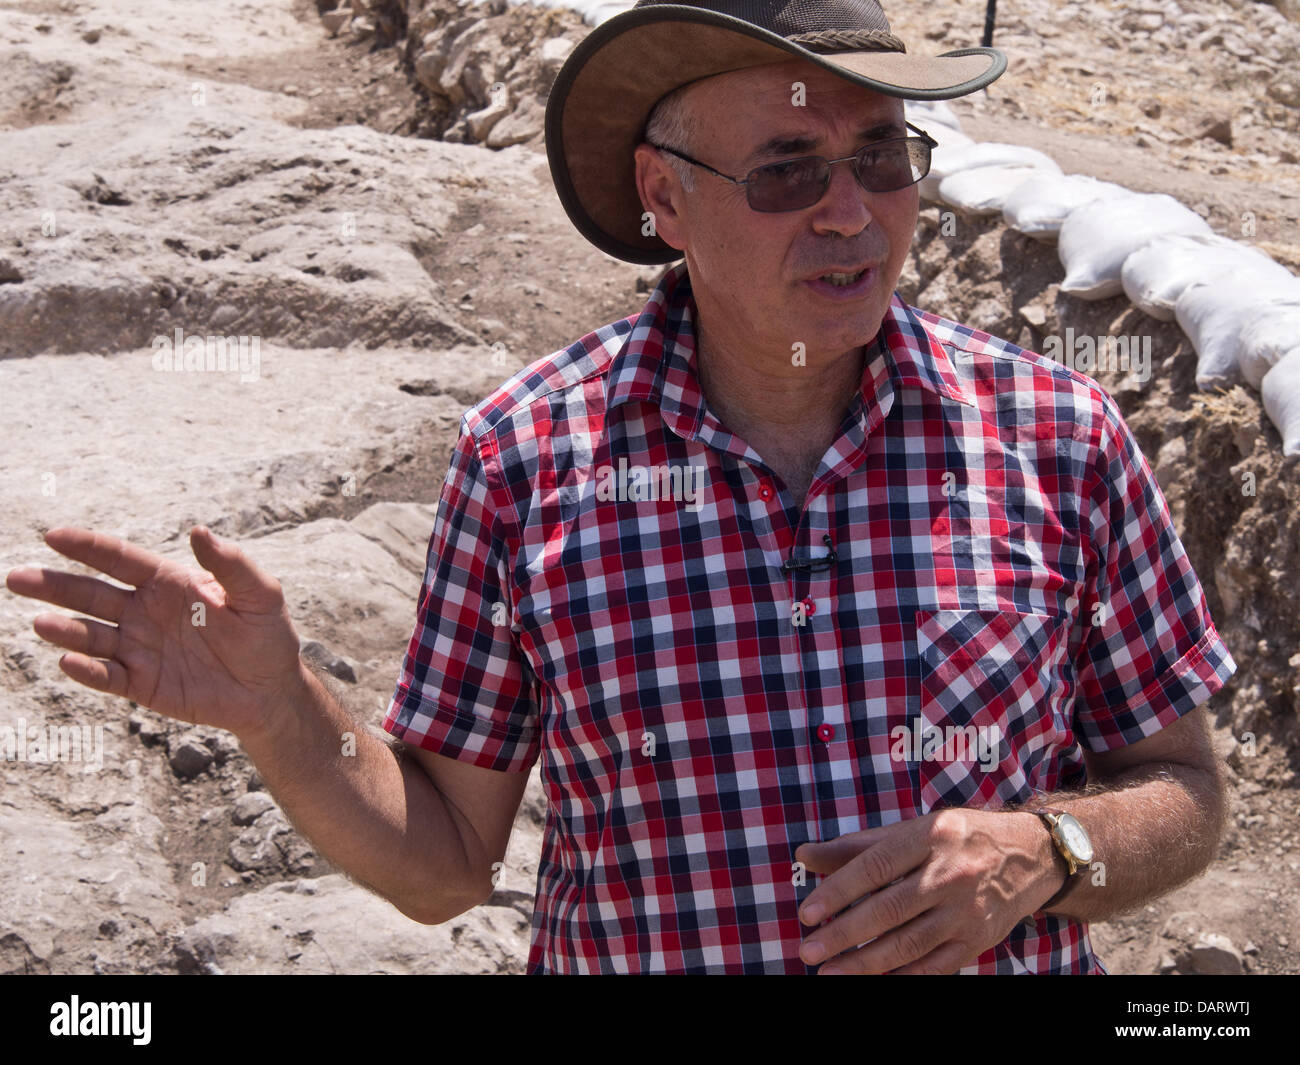 Bet Shemesh, Israel. 18th July 2013. Hebrew University Prof. YOSSI GARFINKEL explains the significance of findings at Khirbet Qeiyafa and the certainty of the identification of King David's 10th century BCE palace, based on evidence including Oxford University Carbon-14 test results. .  Prof. Yossi Garfinkel, of the Hebrew University, and Saar Ganor, of the Israel Antiquities Authority, claim to have positively identified King David's 10th century BCE palace, known to have existed in the Kingdom of Judah at Khirbet Qeiyafa. Credit:  Nir Alon/Alamy Live News Stock Photo